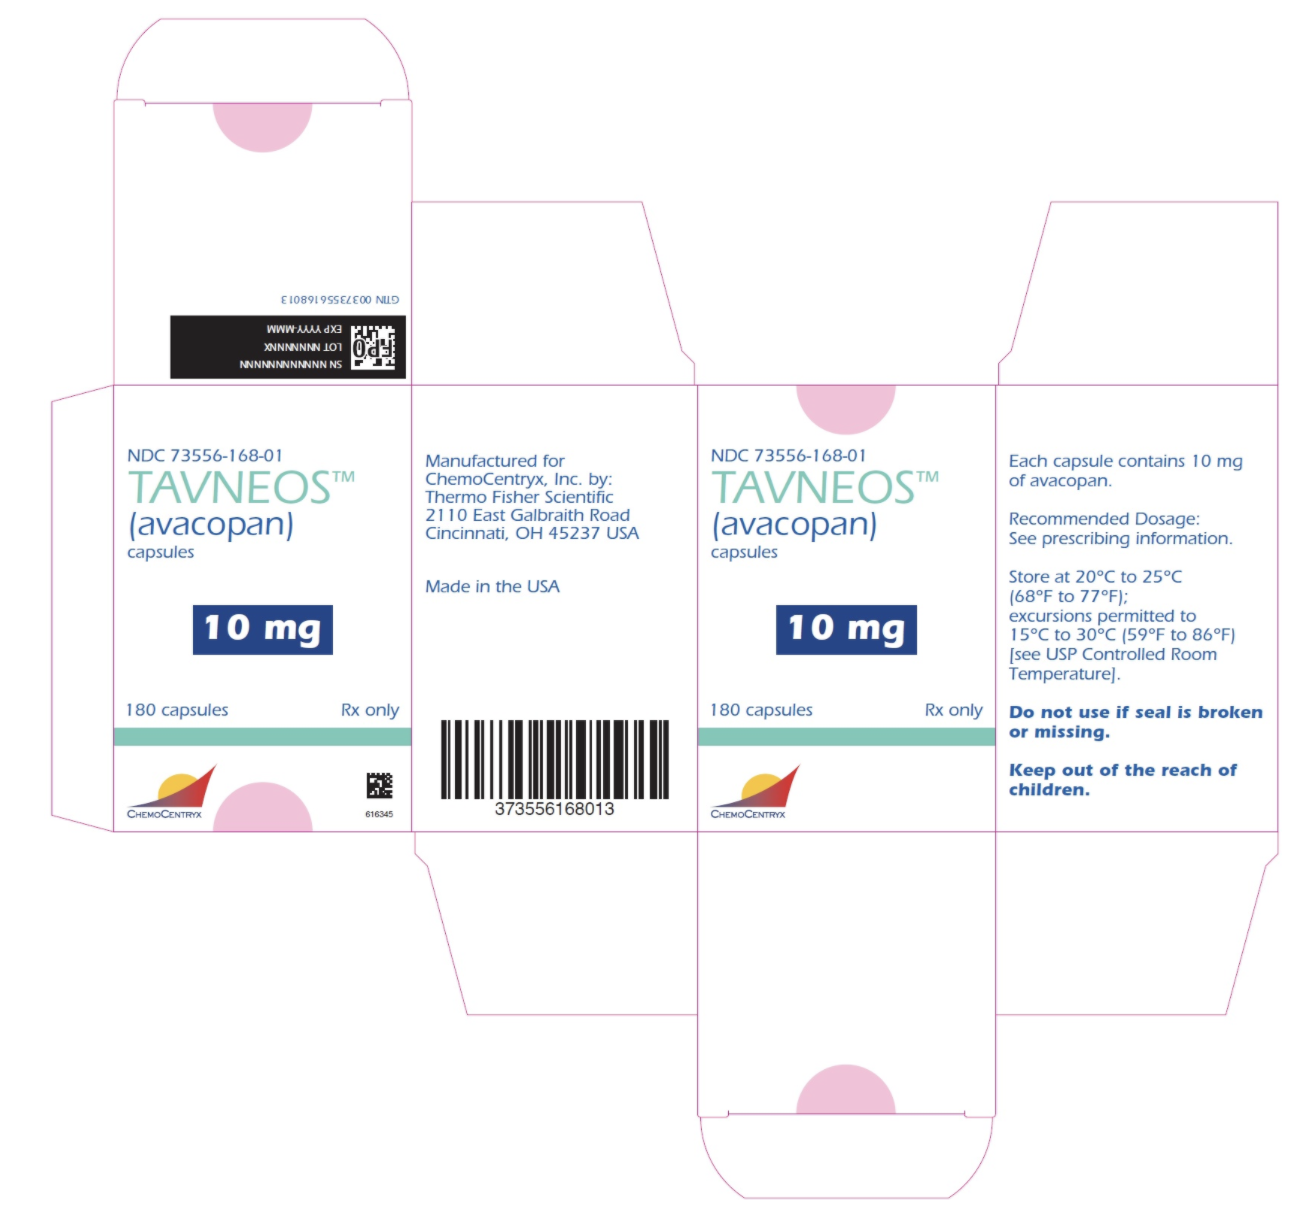 File:Avacopan Packaging 180 Tablets.png